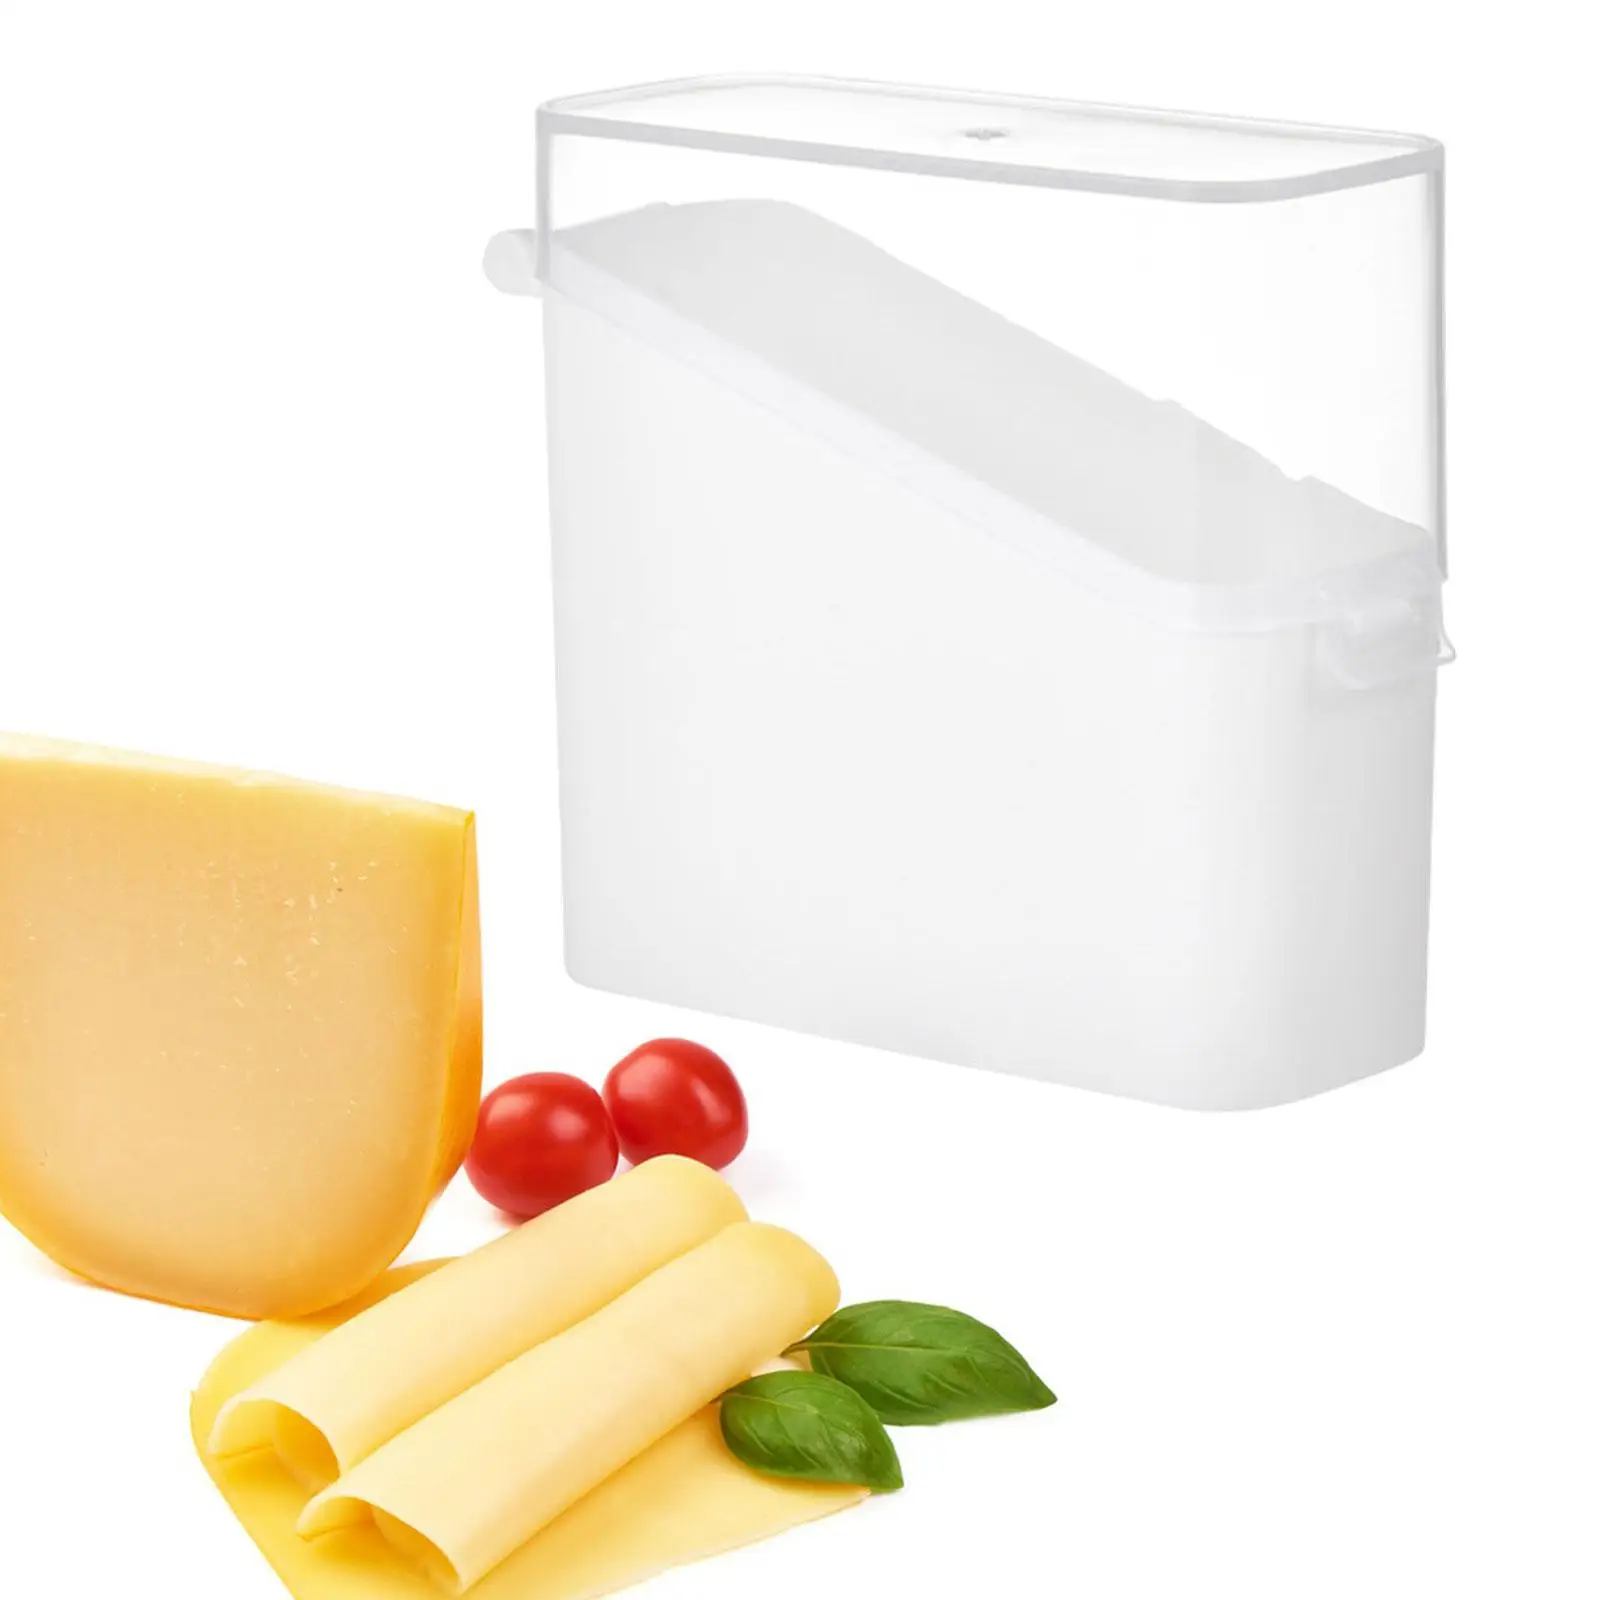 Sliced Cheese Container Cookie Holder Airtight PP Storage Containers Stackable Freezer Drawers Bins Refrigerator Food Container